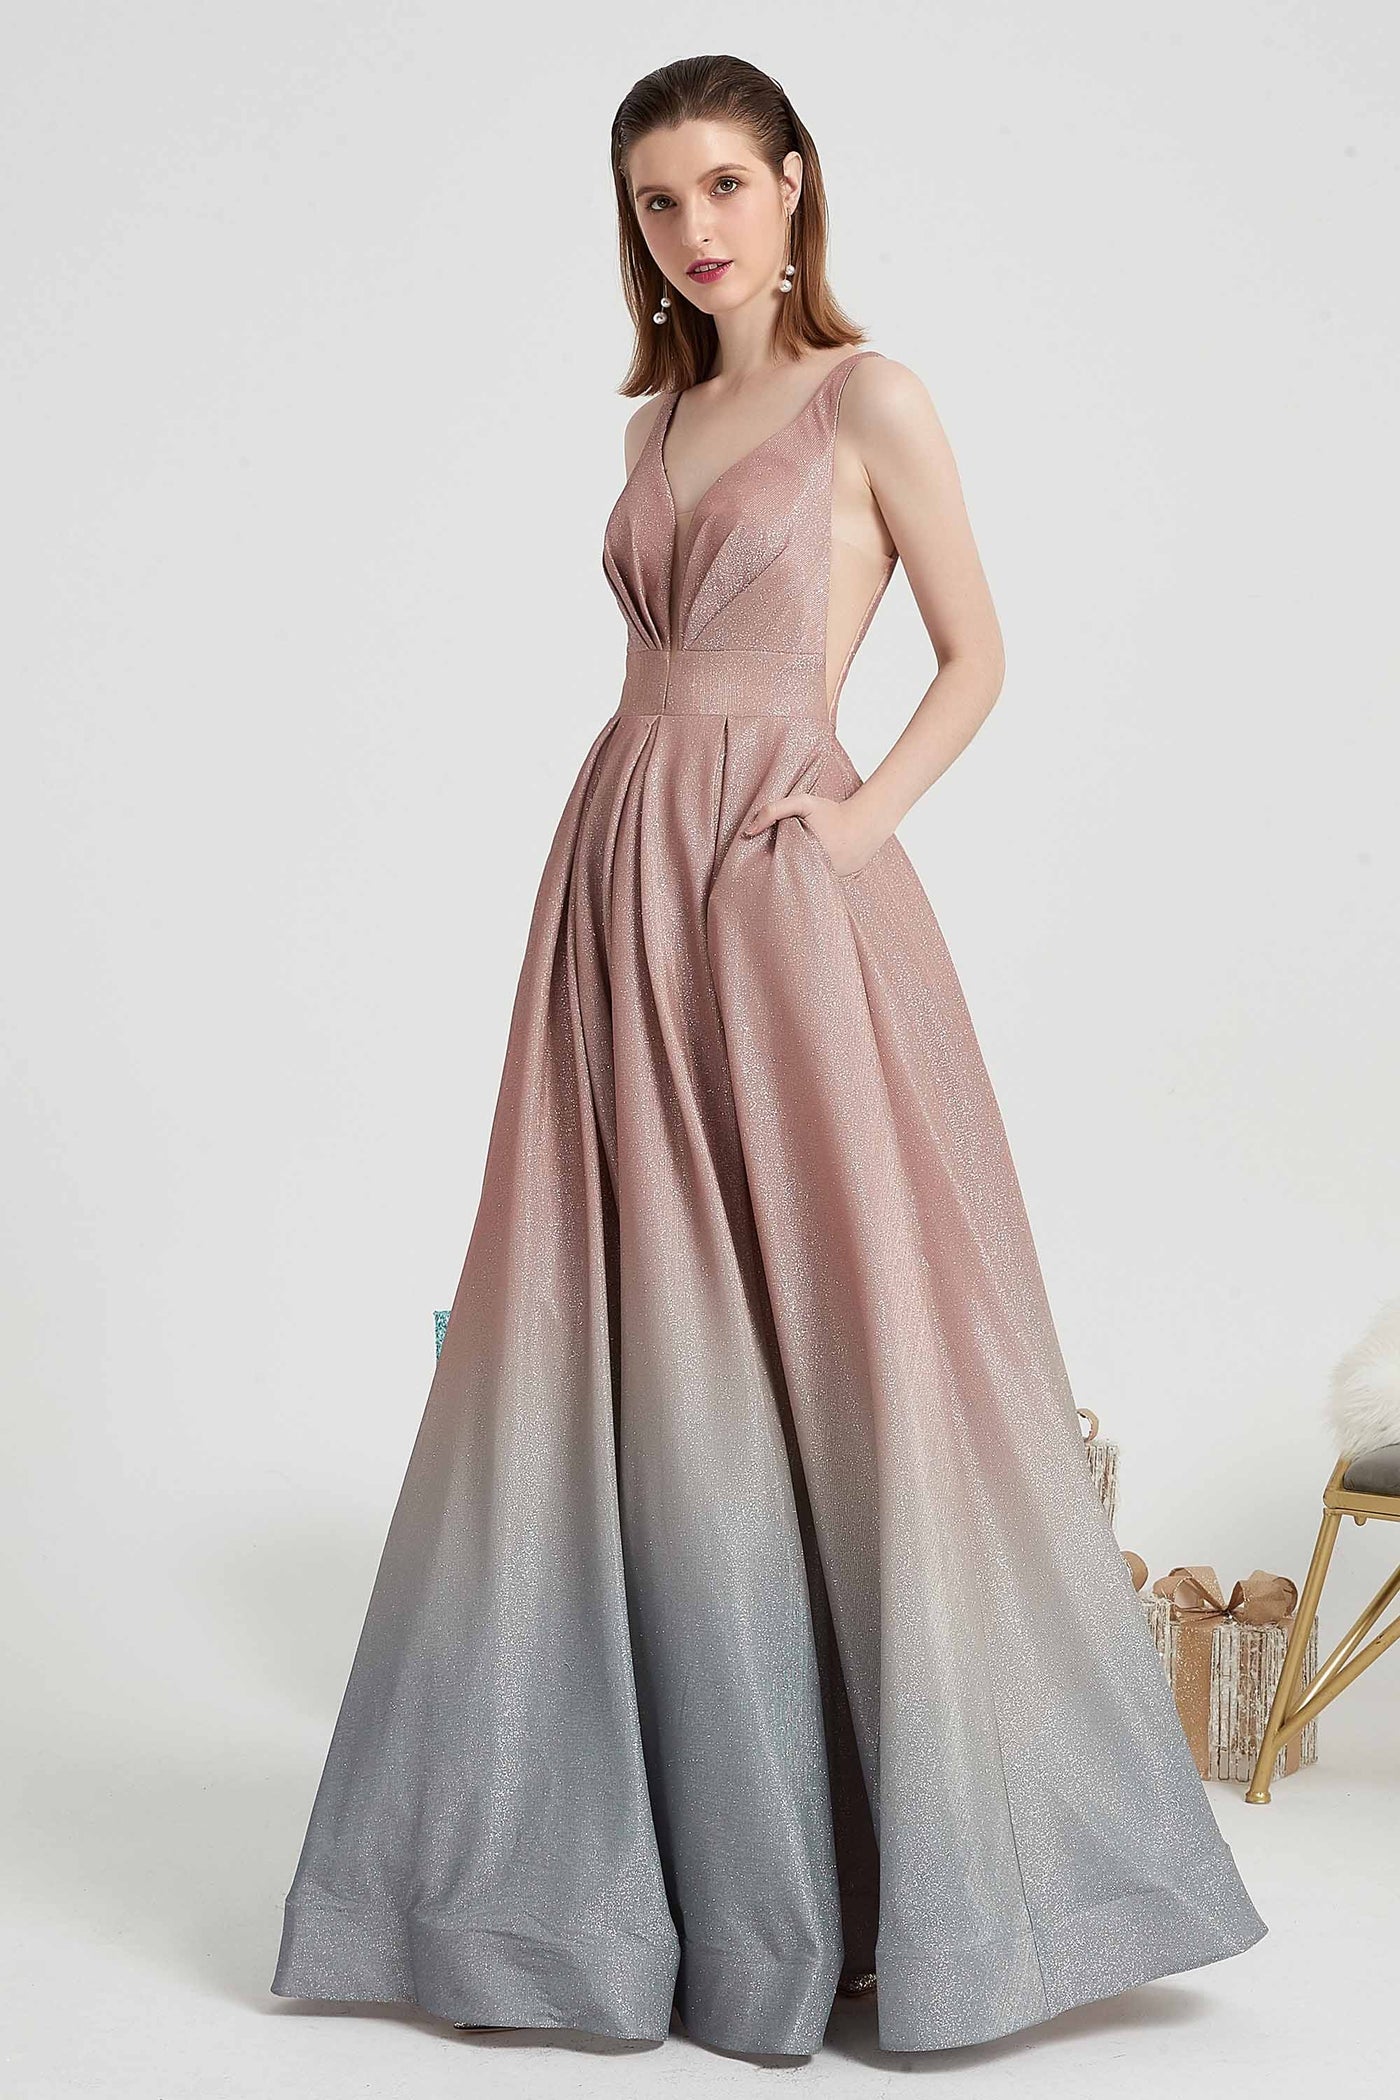 Straps V-Cut Gradient Pleated BodiceParty Prom Gown